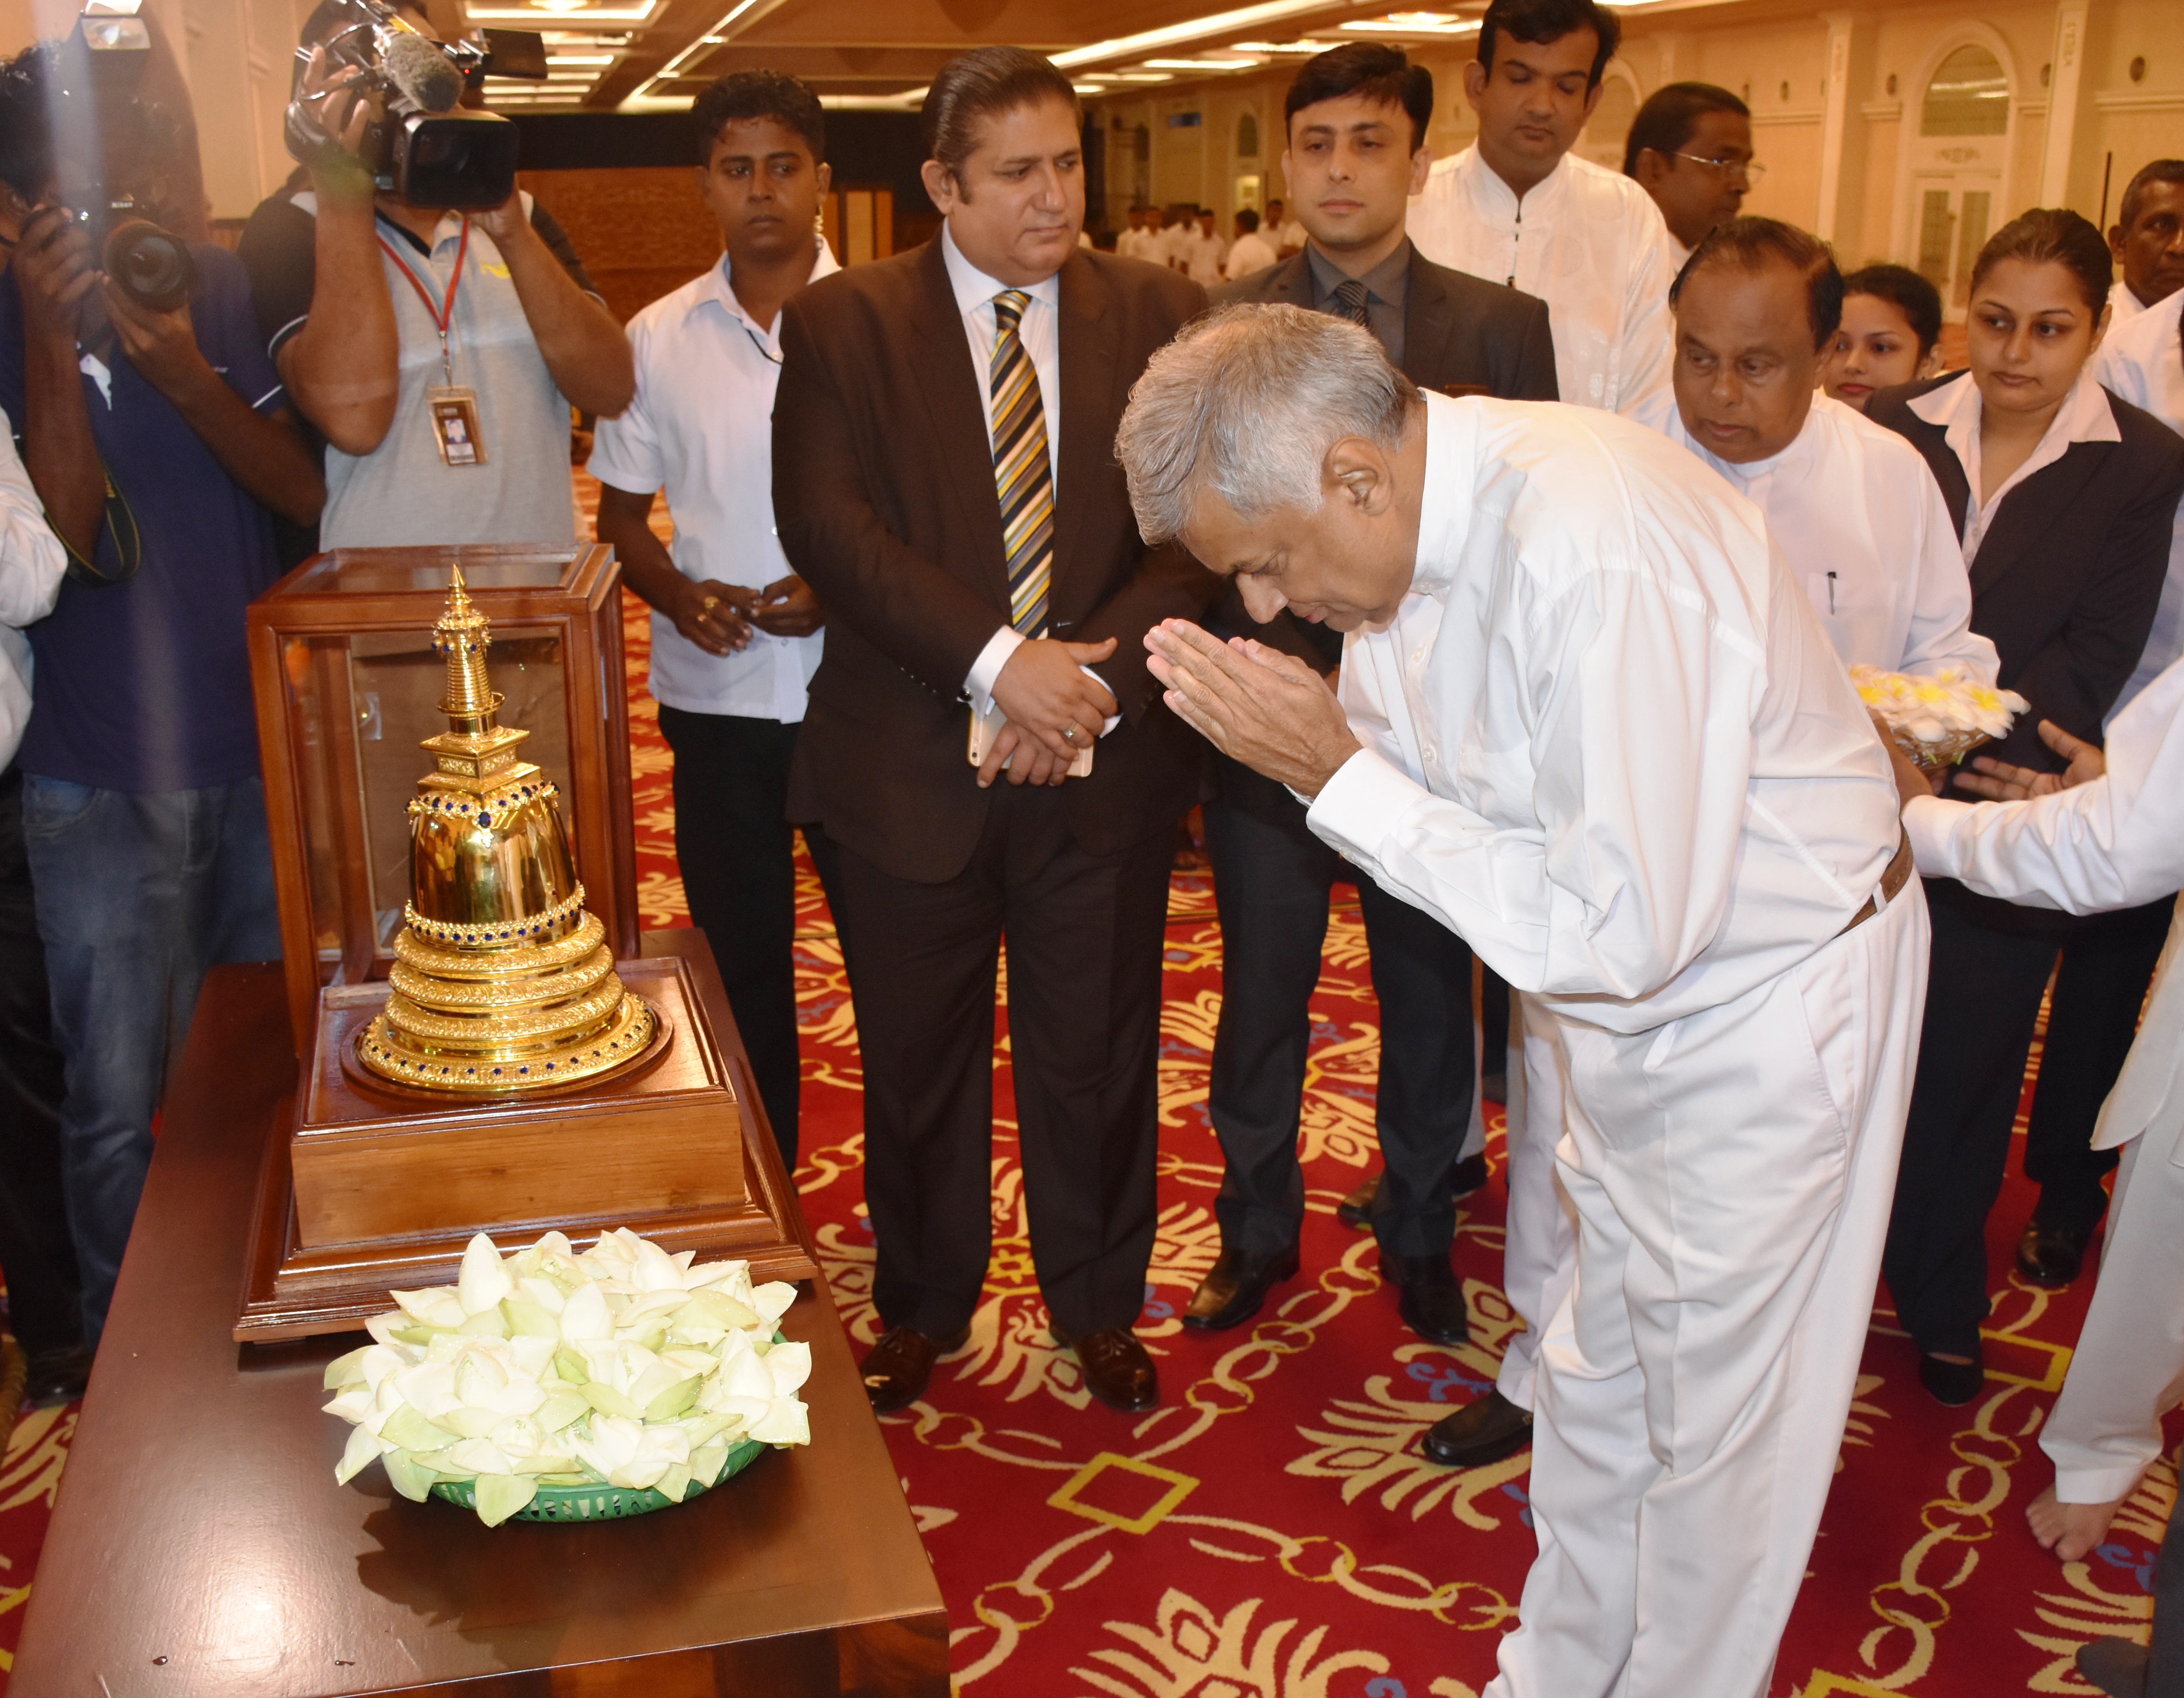 Holy Relics of Lord Buddha returns to Pakistan with veneration from Millions of Lankans